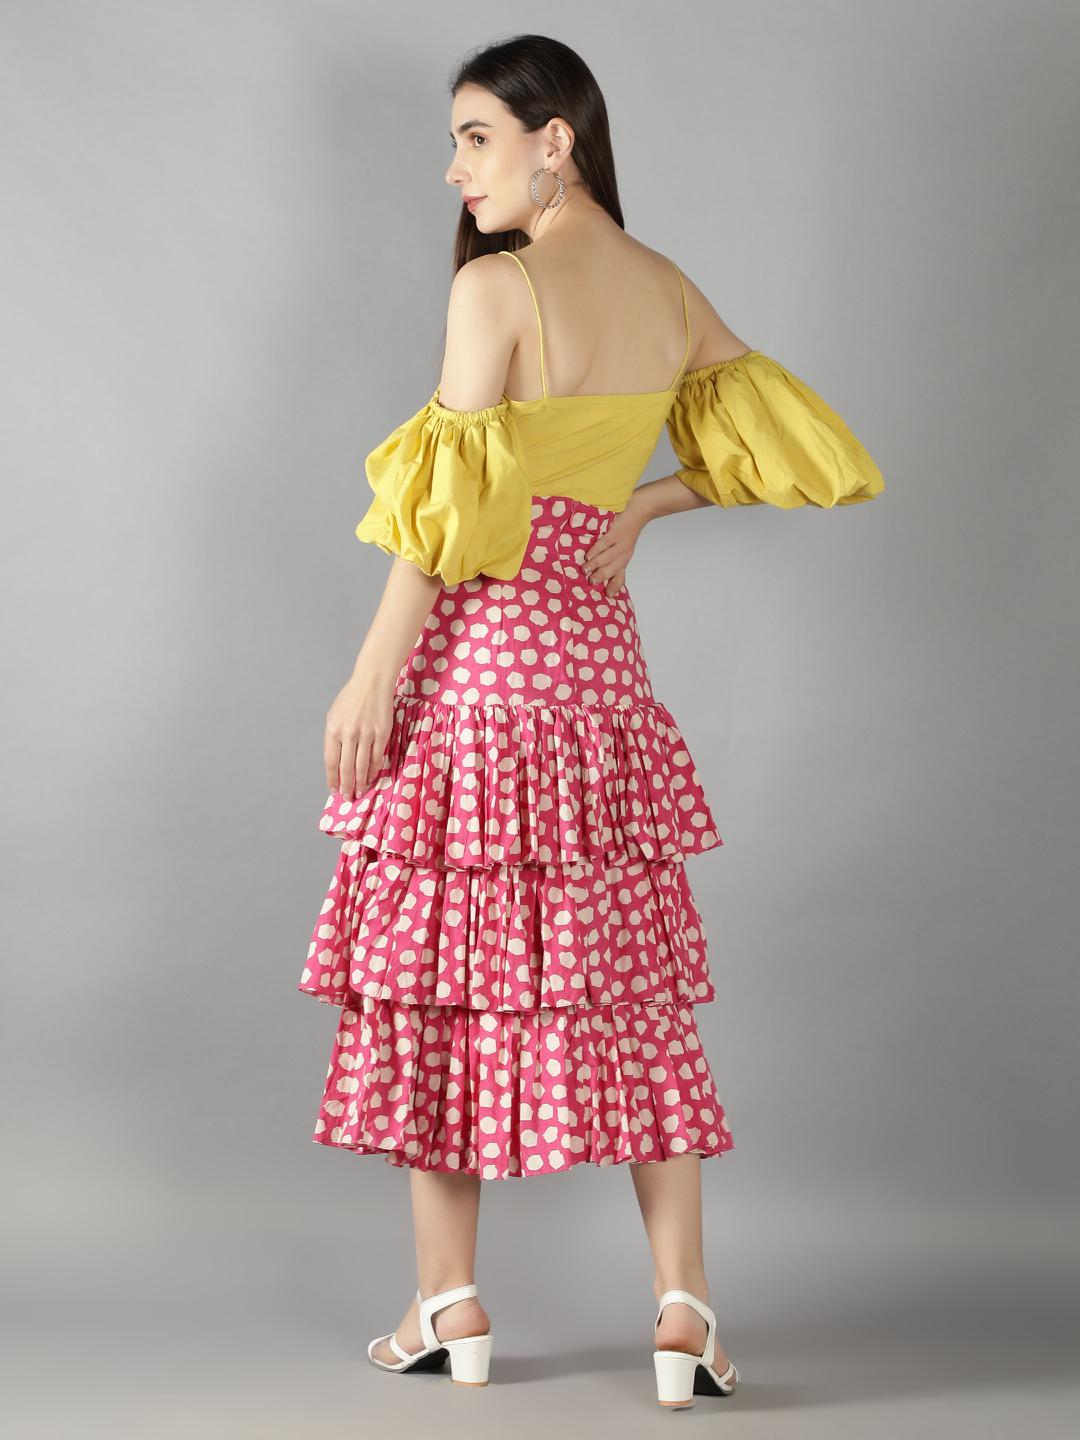 lime-yellow-off-shoulder-top-with-retro-pink-polka-dots-layered-skirt-11740120YL, Women Clothing, Cotton Matching Set